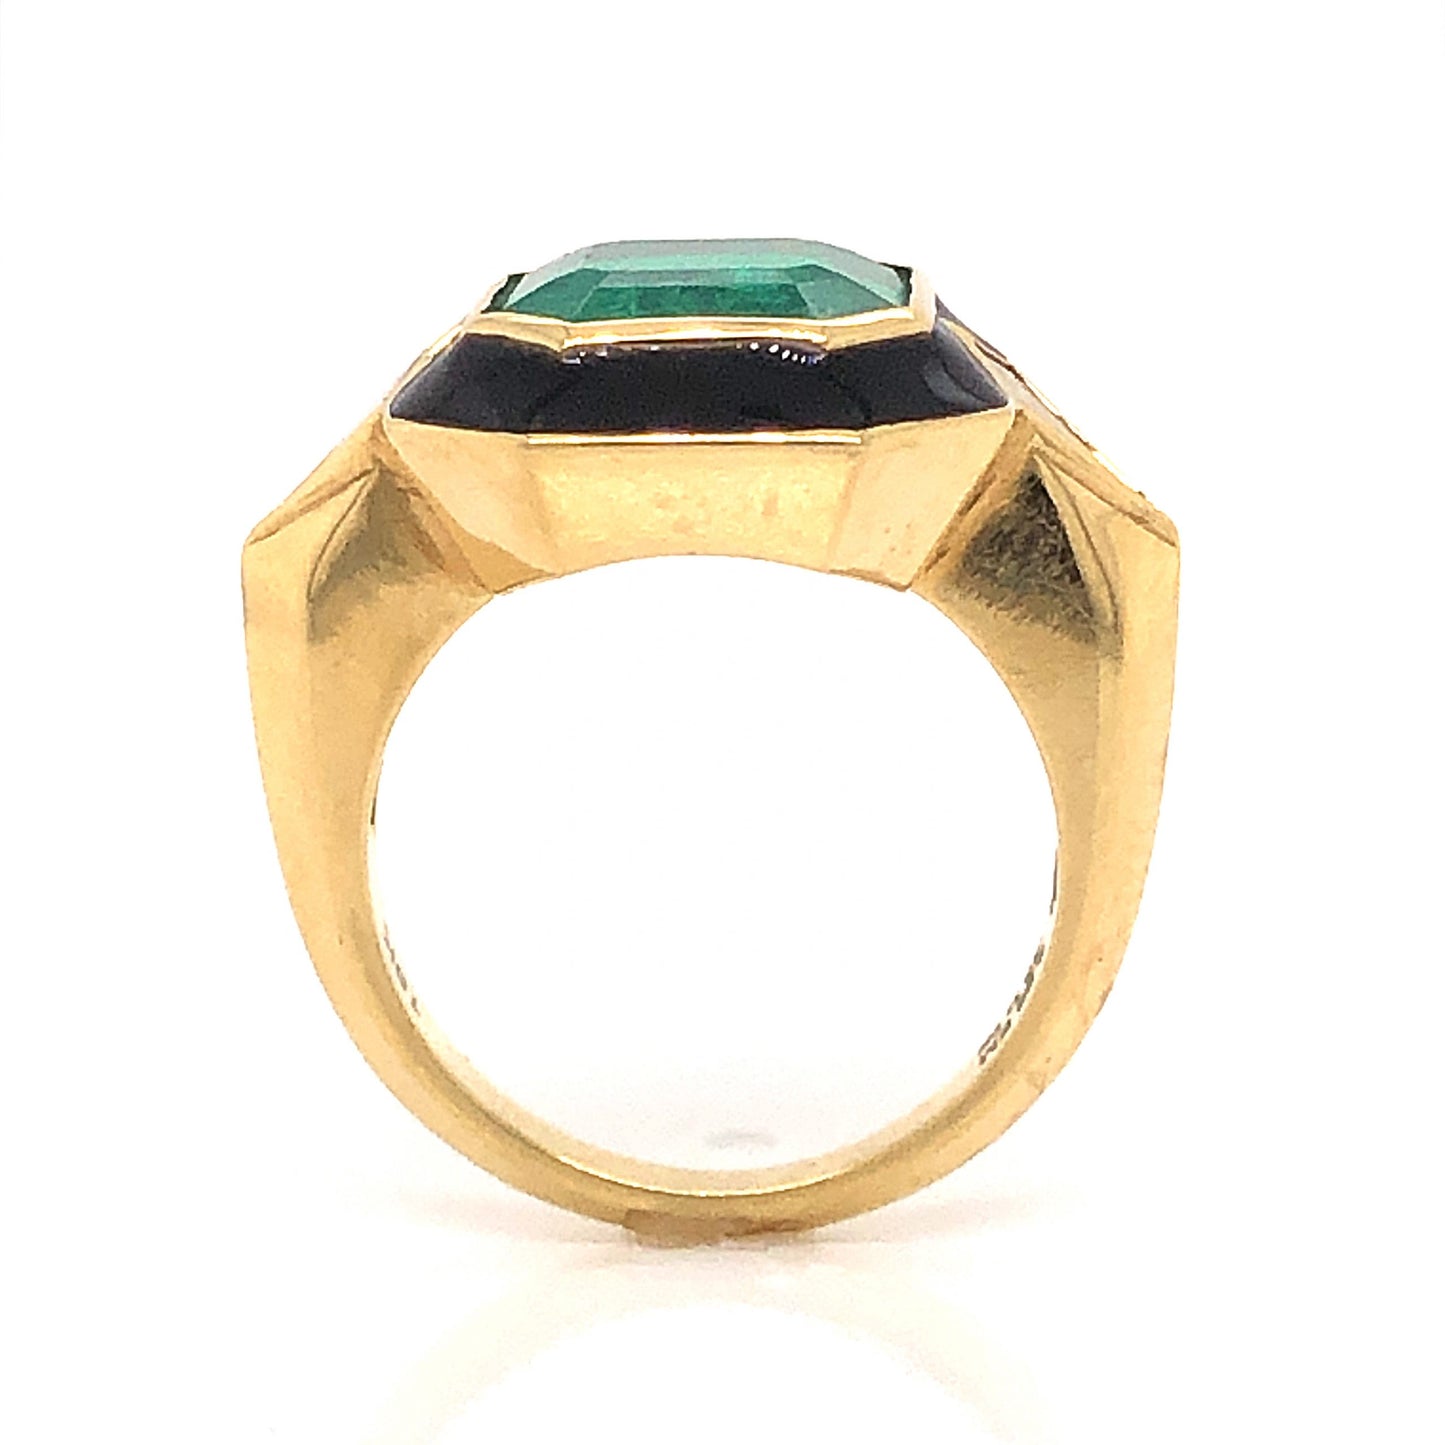 Emerald & Onyx Cocktail Ring in 18k Yellow Gold